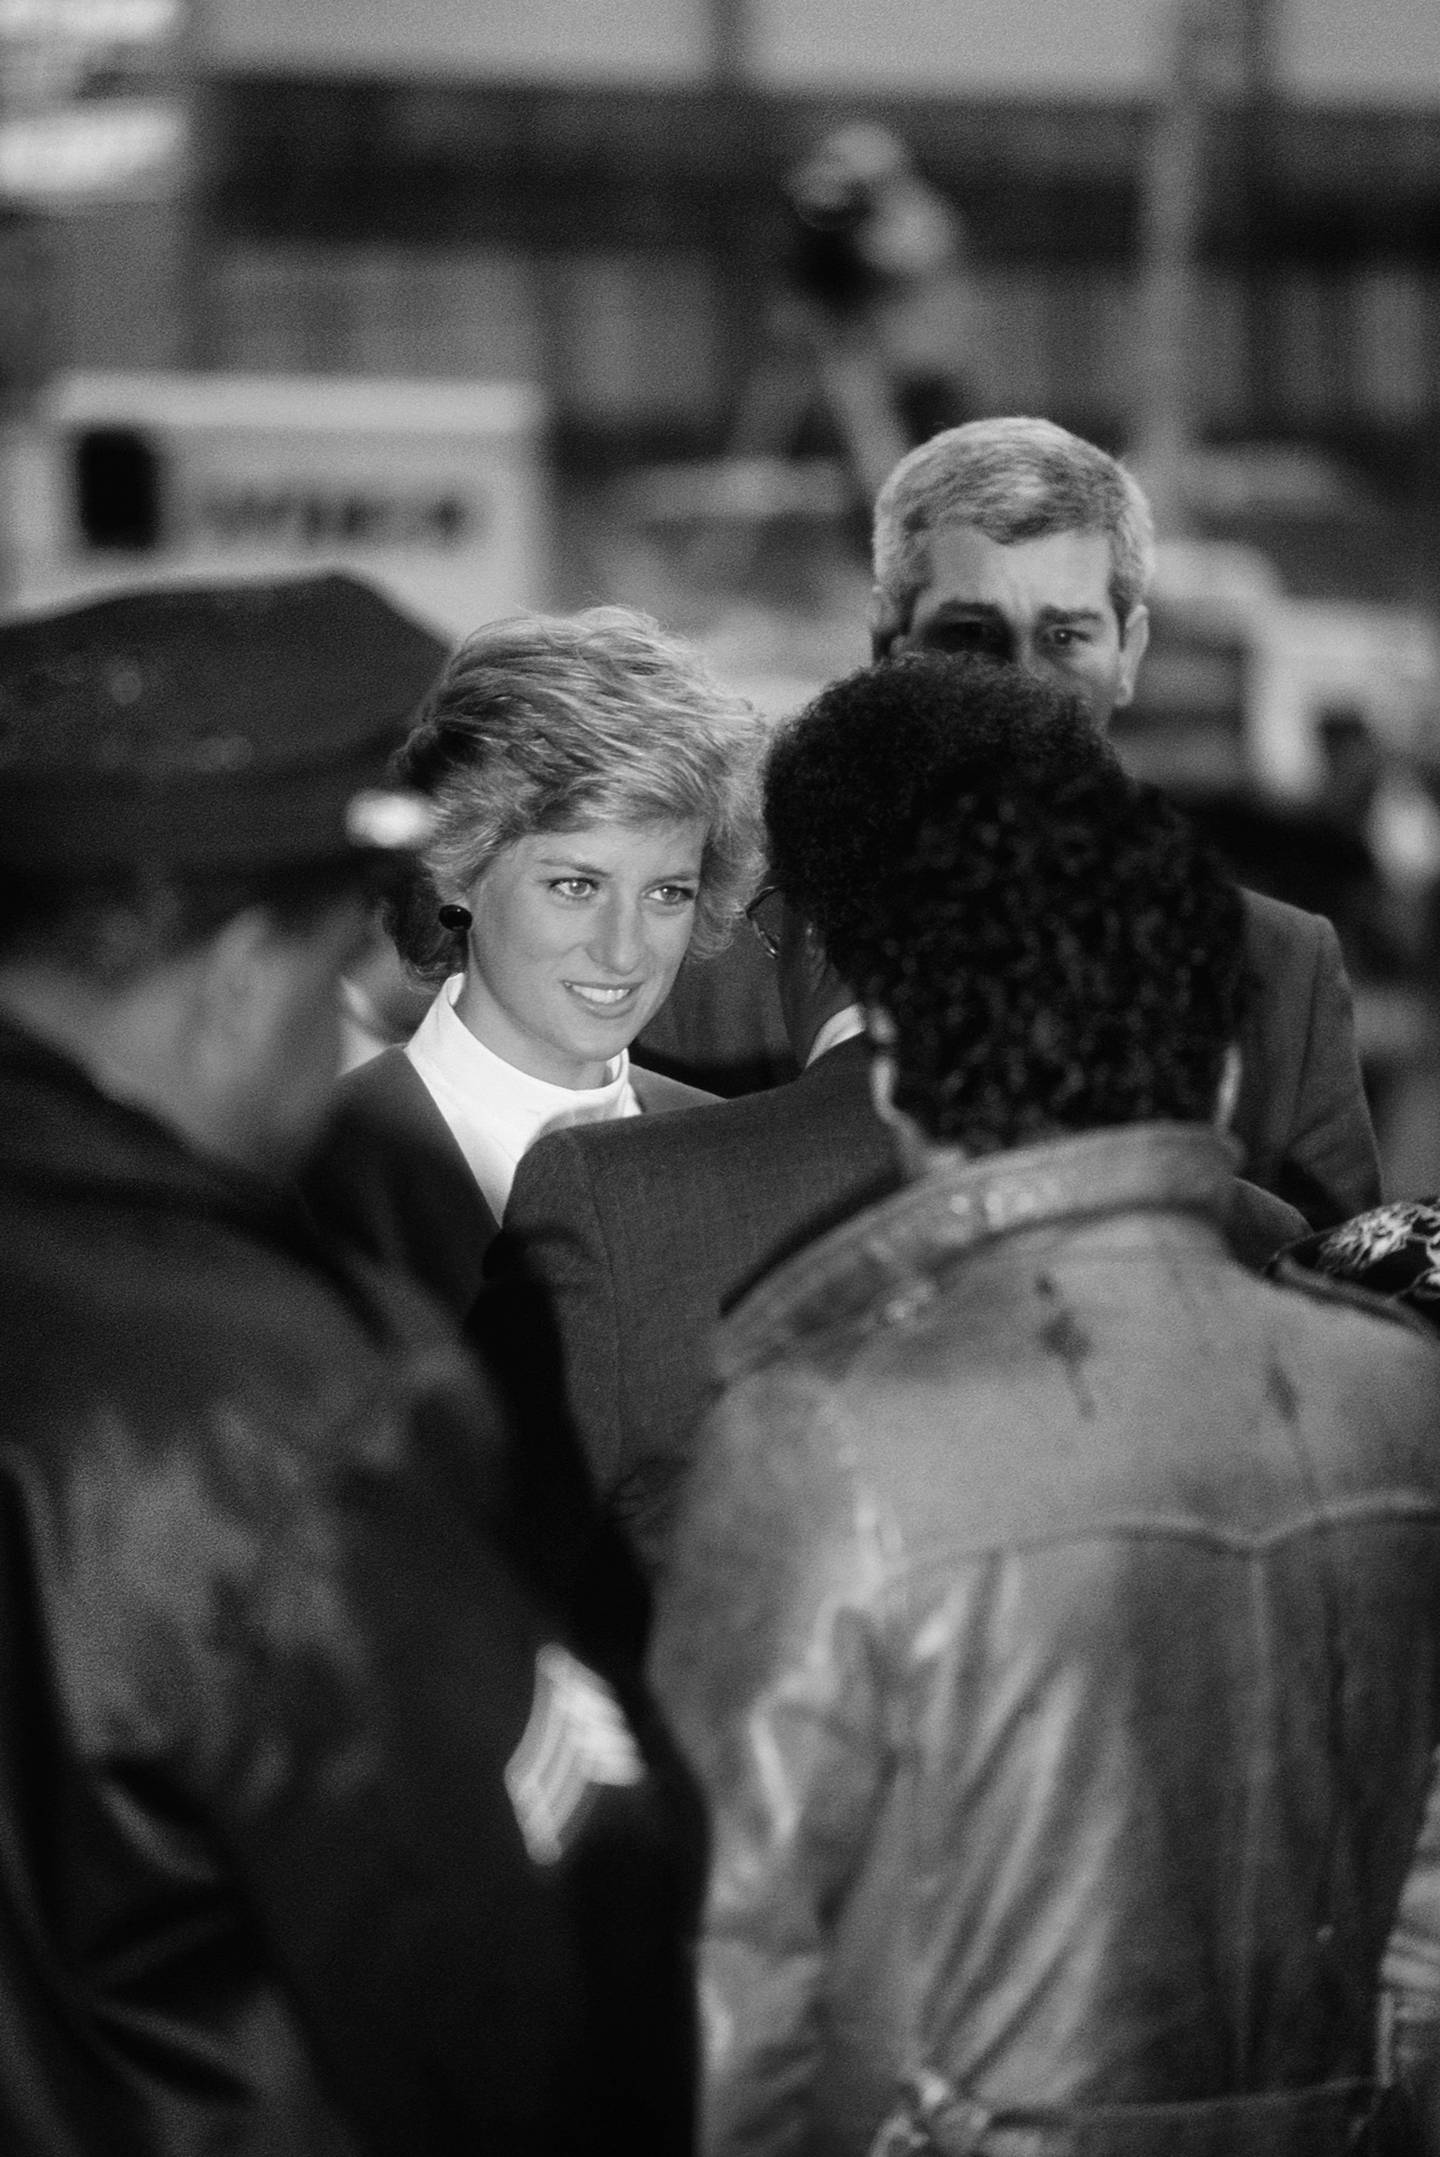 Dianafilmen - 2E03NP3 Diana, Princess of Wales surrounded by police and security as she arrives for a visit to Harlem Hospital?s pediatric AIDS unit in Harlem. New York City, USA. Feb 1989  NTB kultur